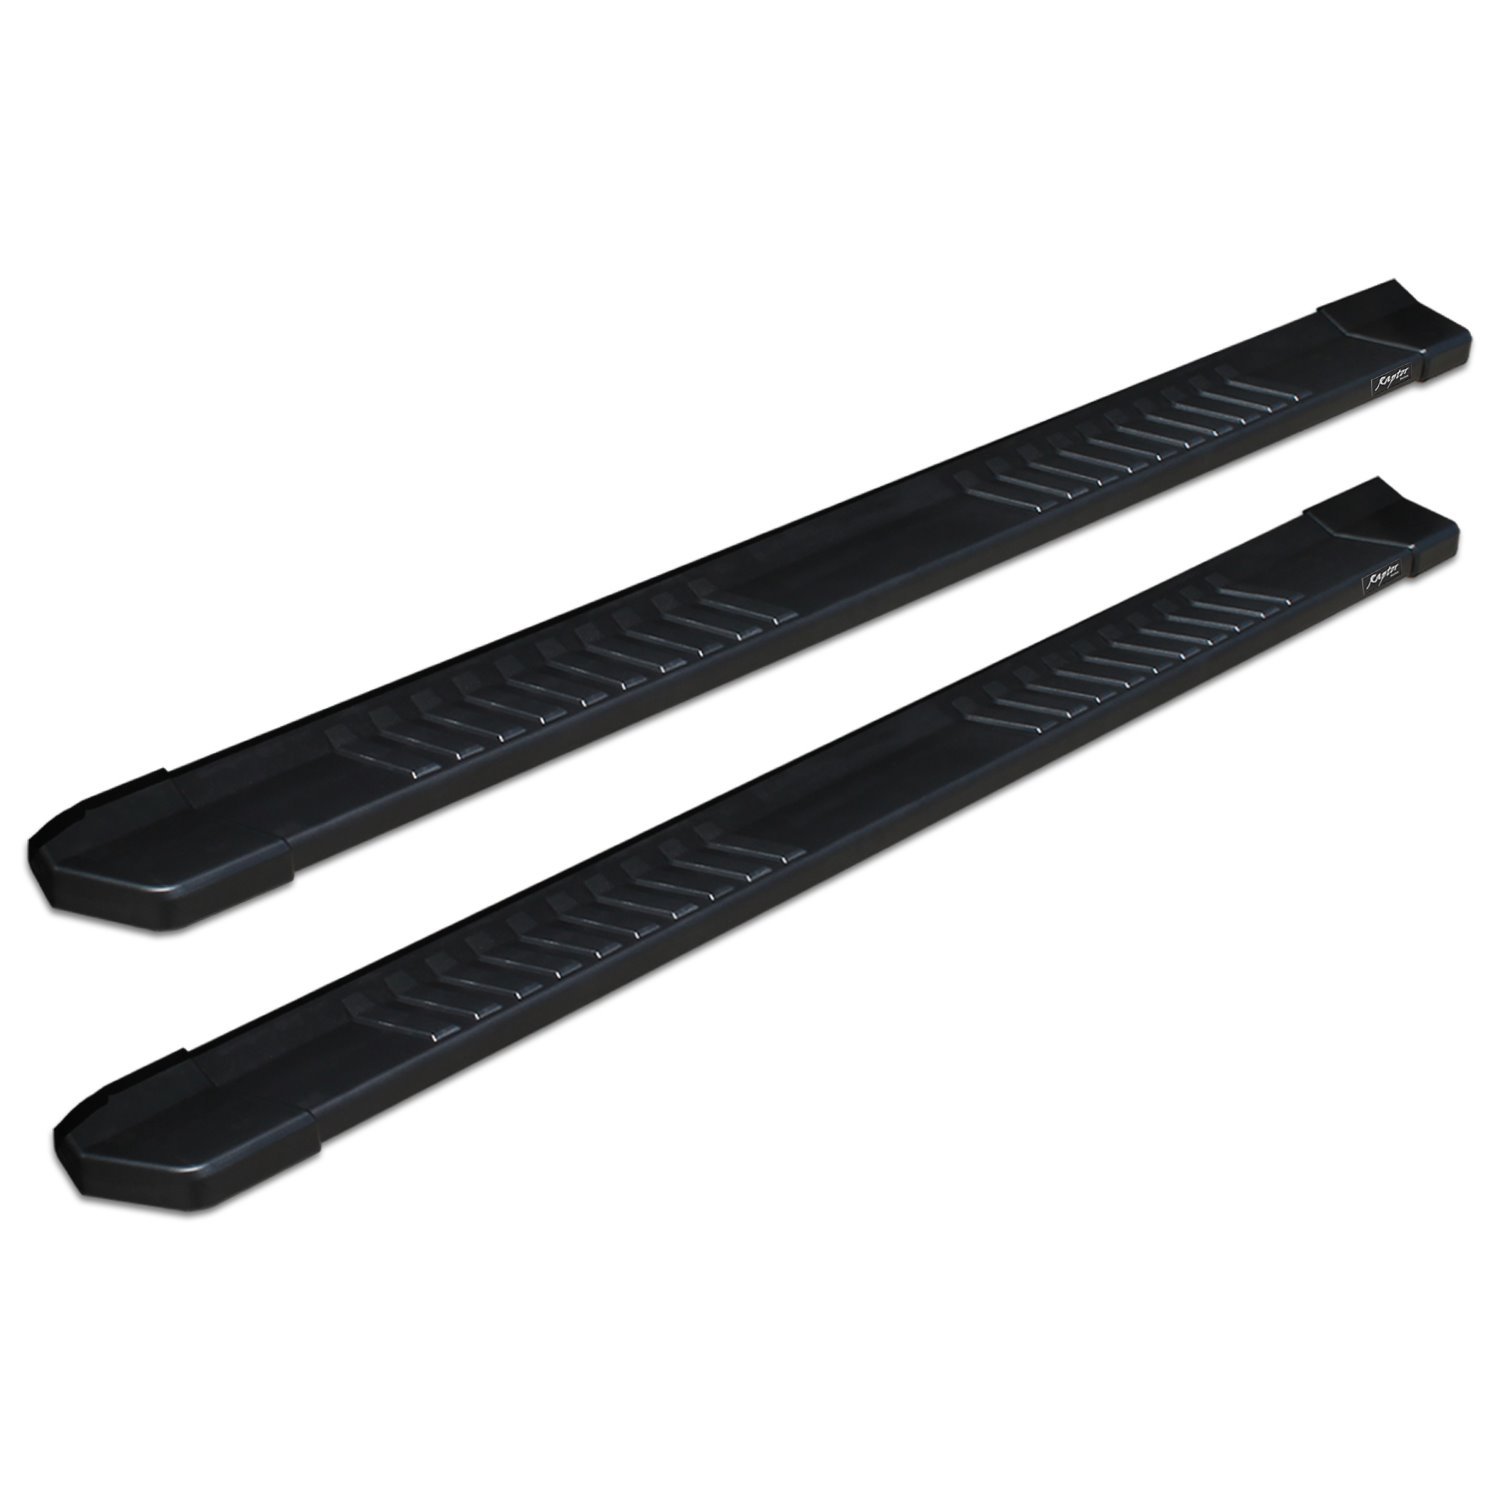 1704-0142BT 6 in OEM Style Slide Track Running Boards, Black Aluminum, Fits Select Toyota Tundra CrewMax Cab